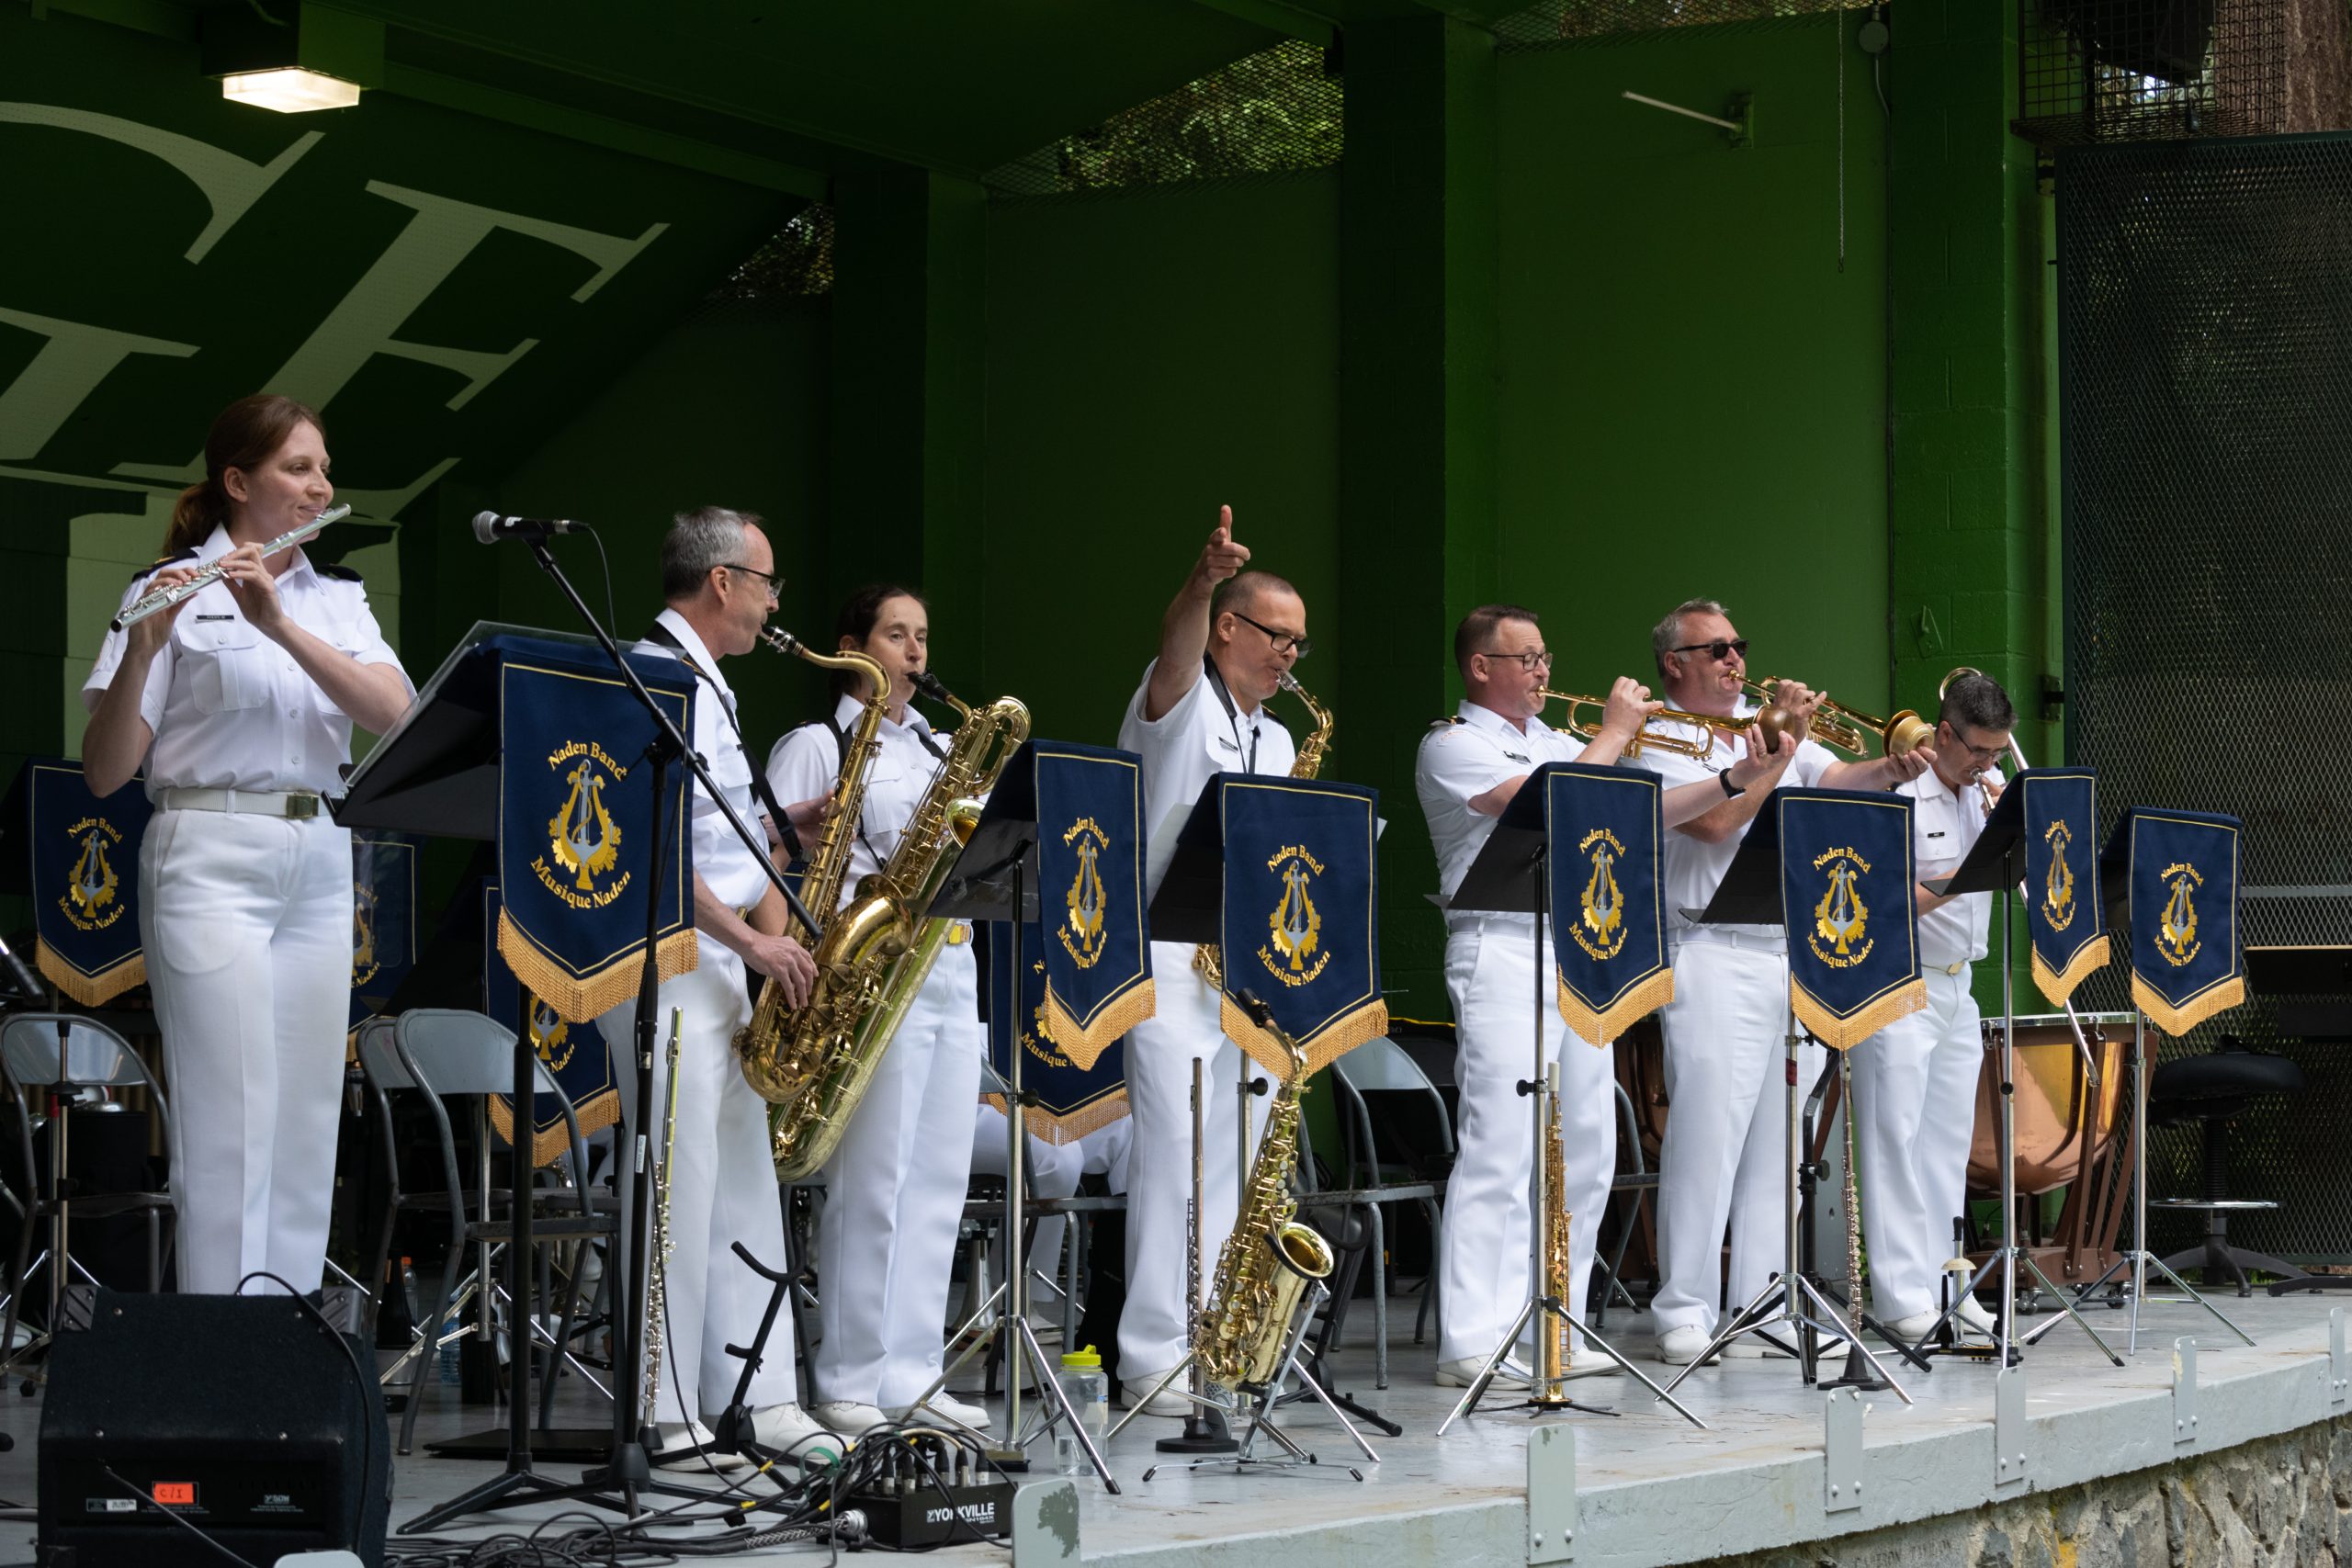 Members of the Naden Band of the Royal Canadian Navy perform for their summer concert at Beacon Hill Park.